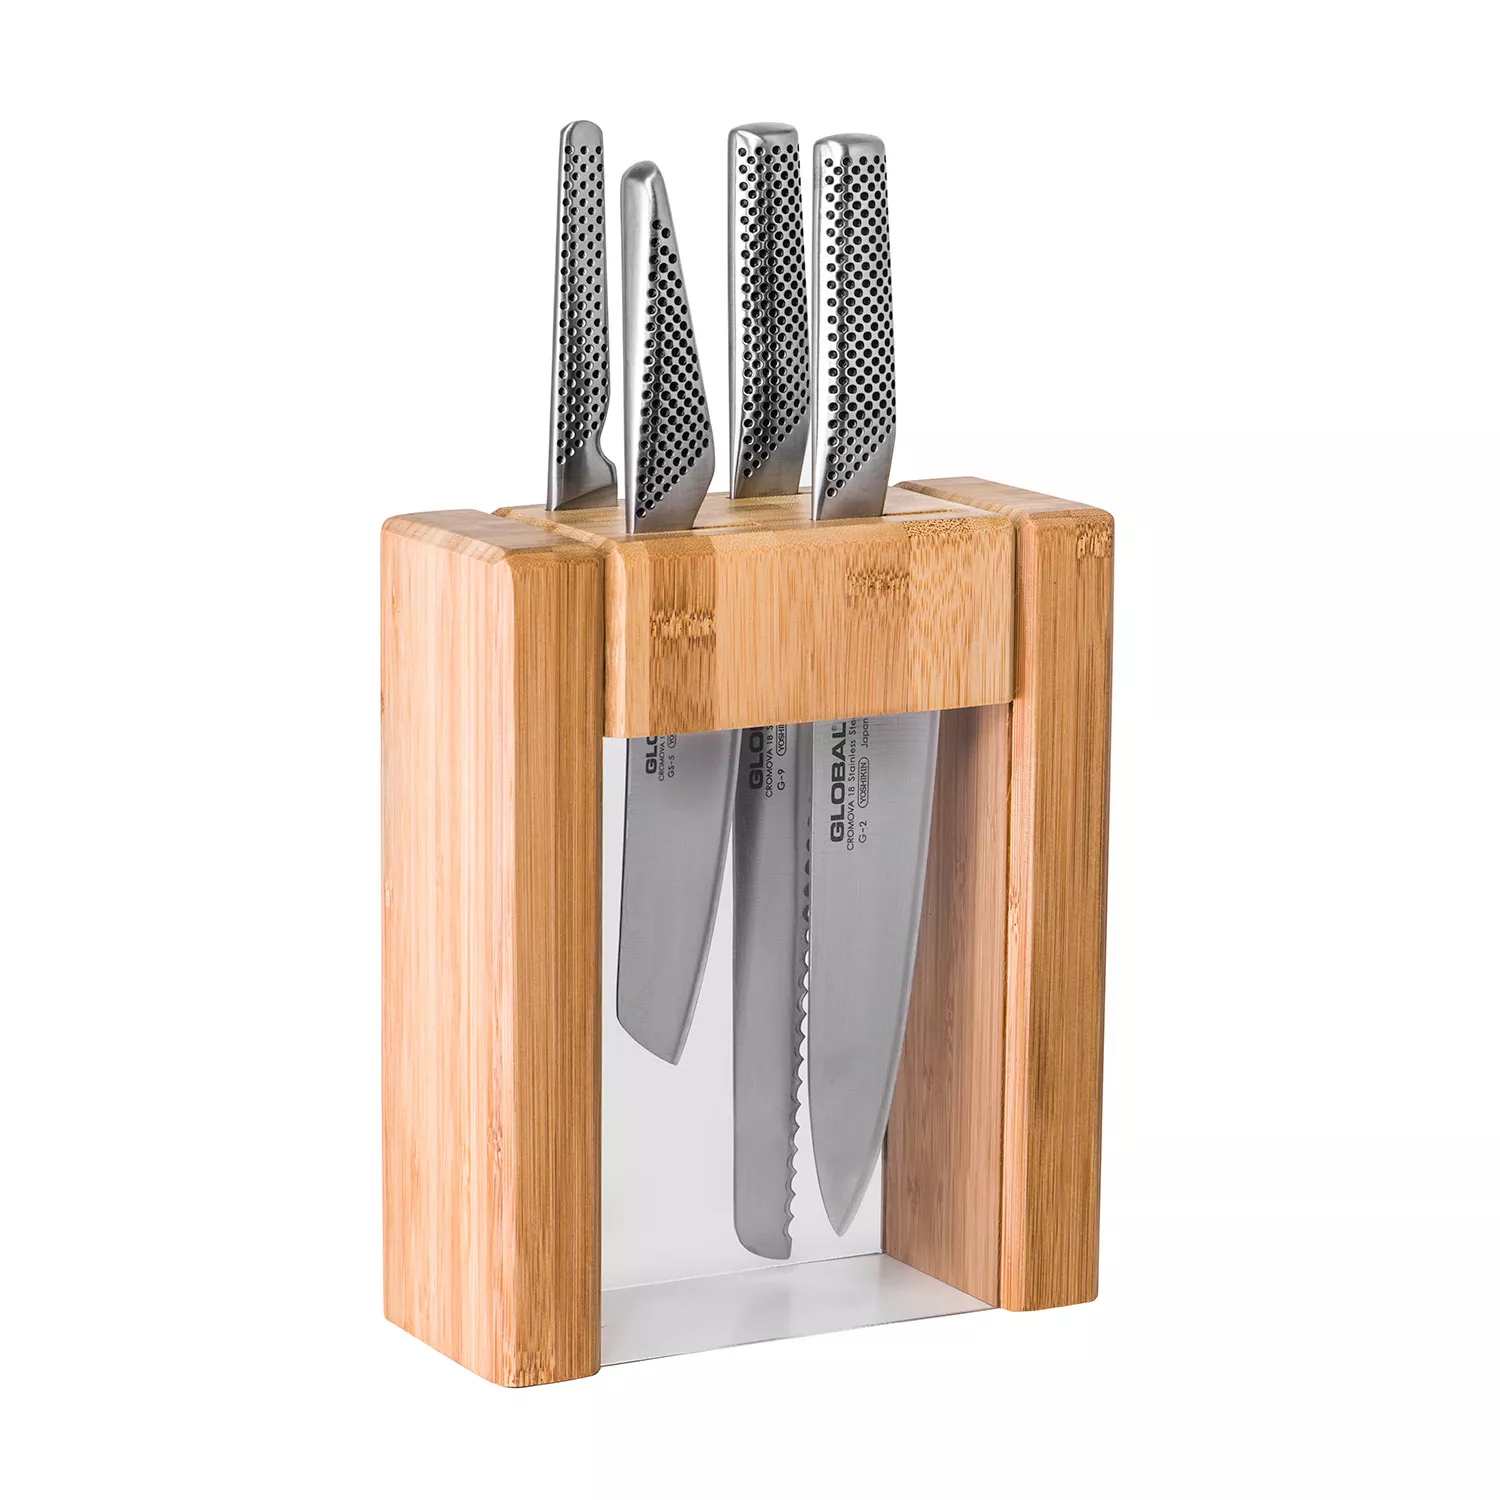 Upgrade Your Cutlery with a Premium 6 Piece Stainless Steel Japanese Knife  Set, Buy the Classic 6 Piece Knife Block Set at GLOBAL CUTLERY